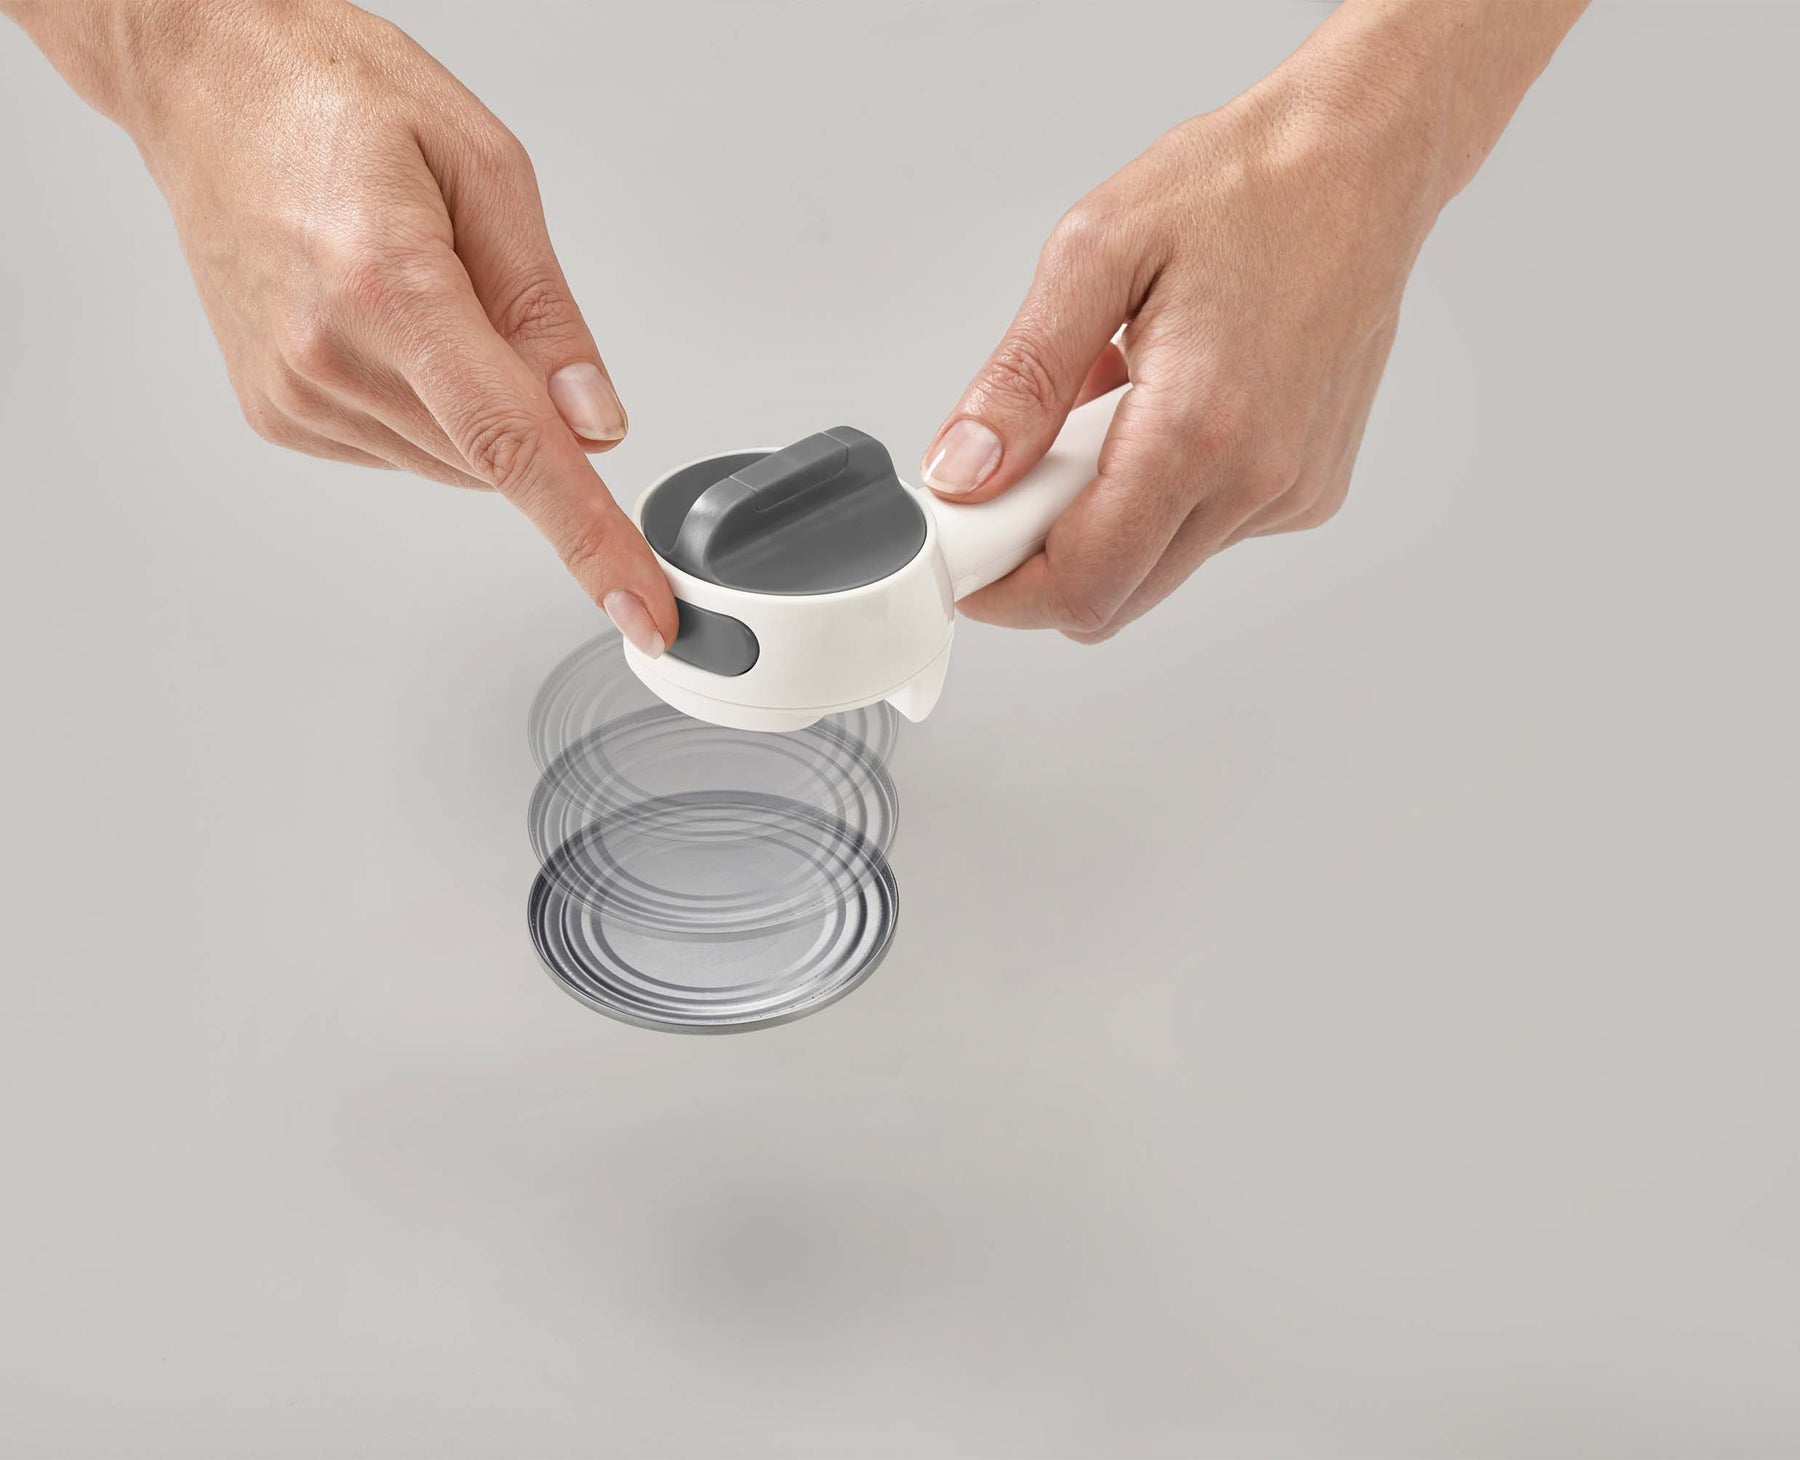 Can-Do Plus Can Opener - Gray